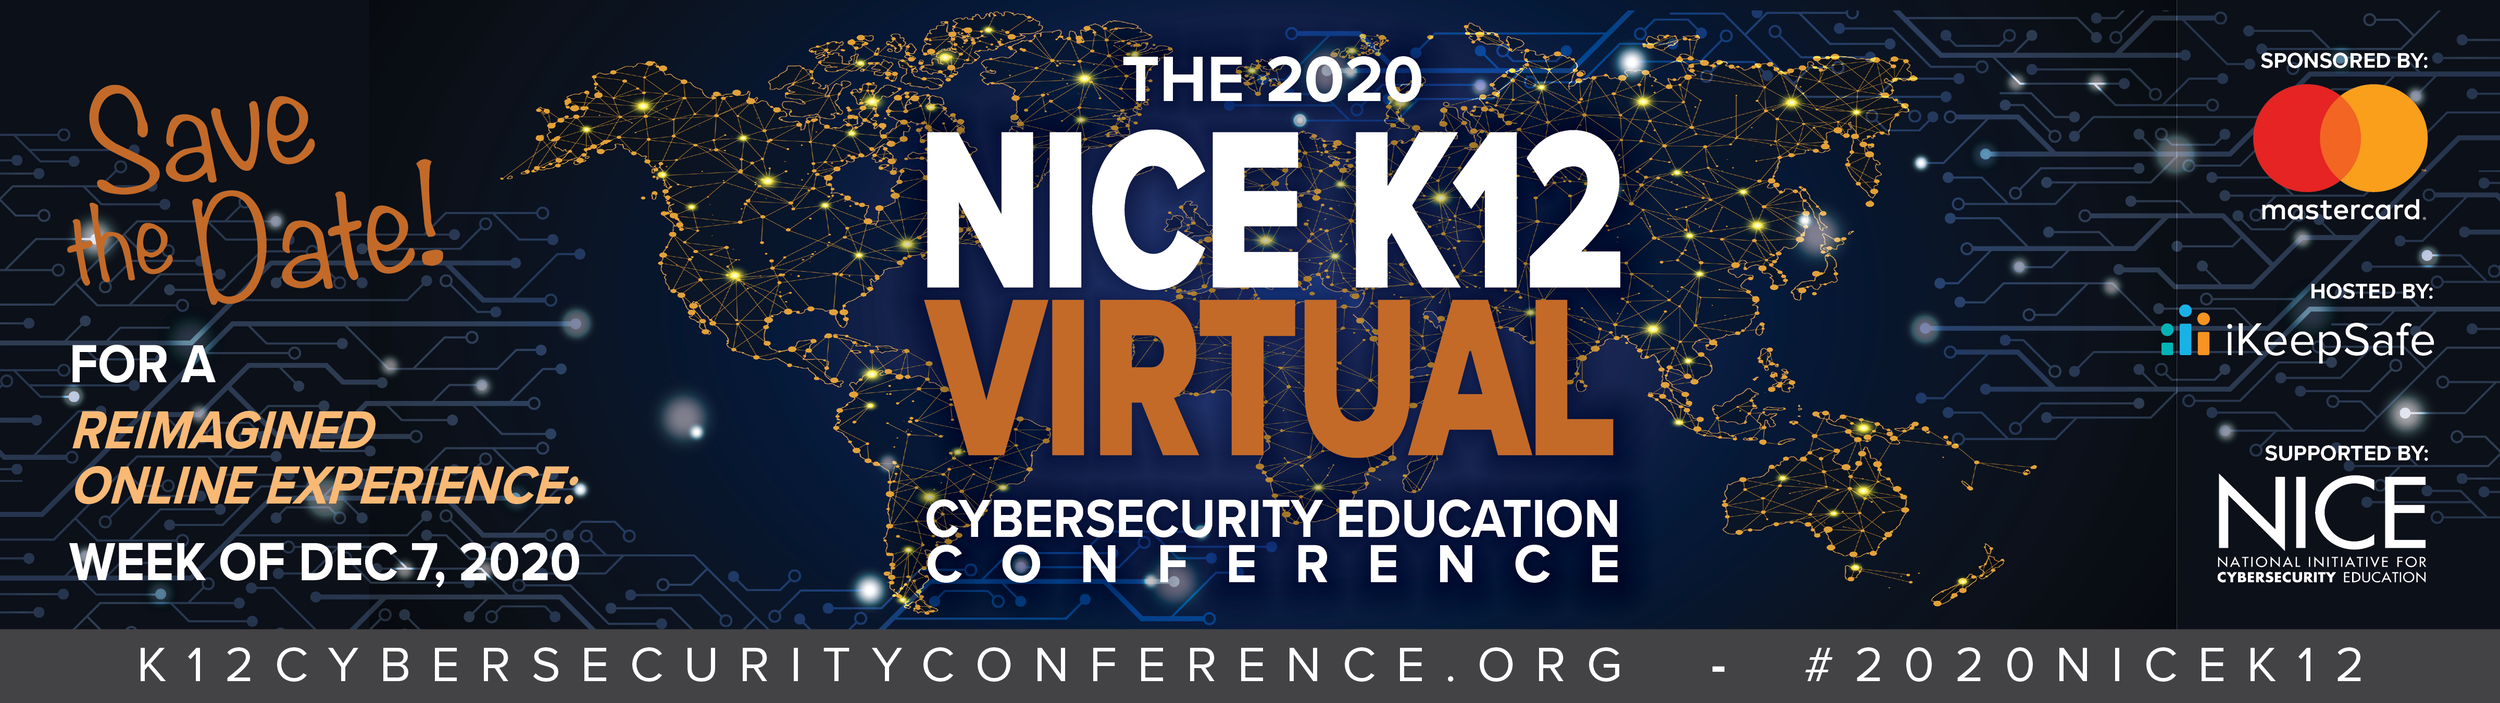 Conference Planning Committee Nice K12 Cybersecurity Education Conference